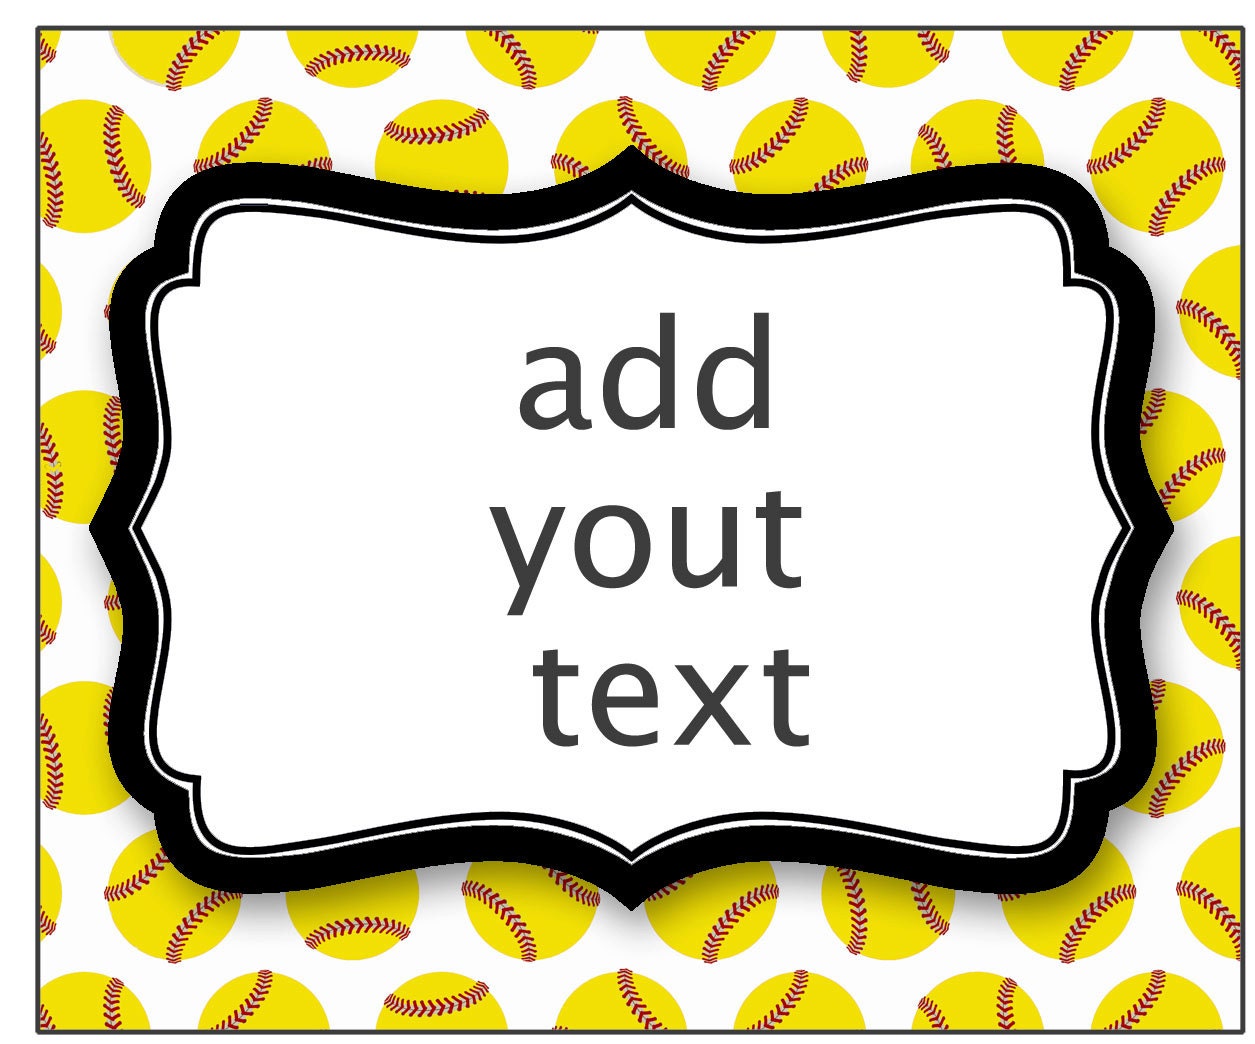 printable softball tags or labels ill add your text then